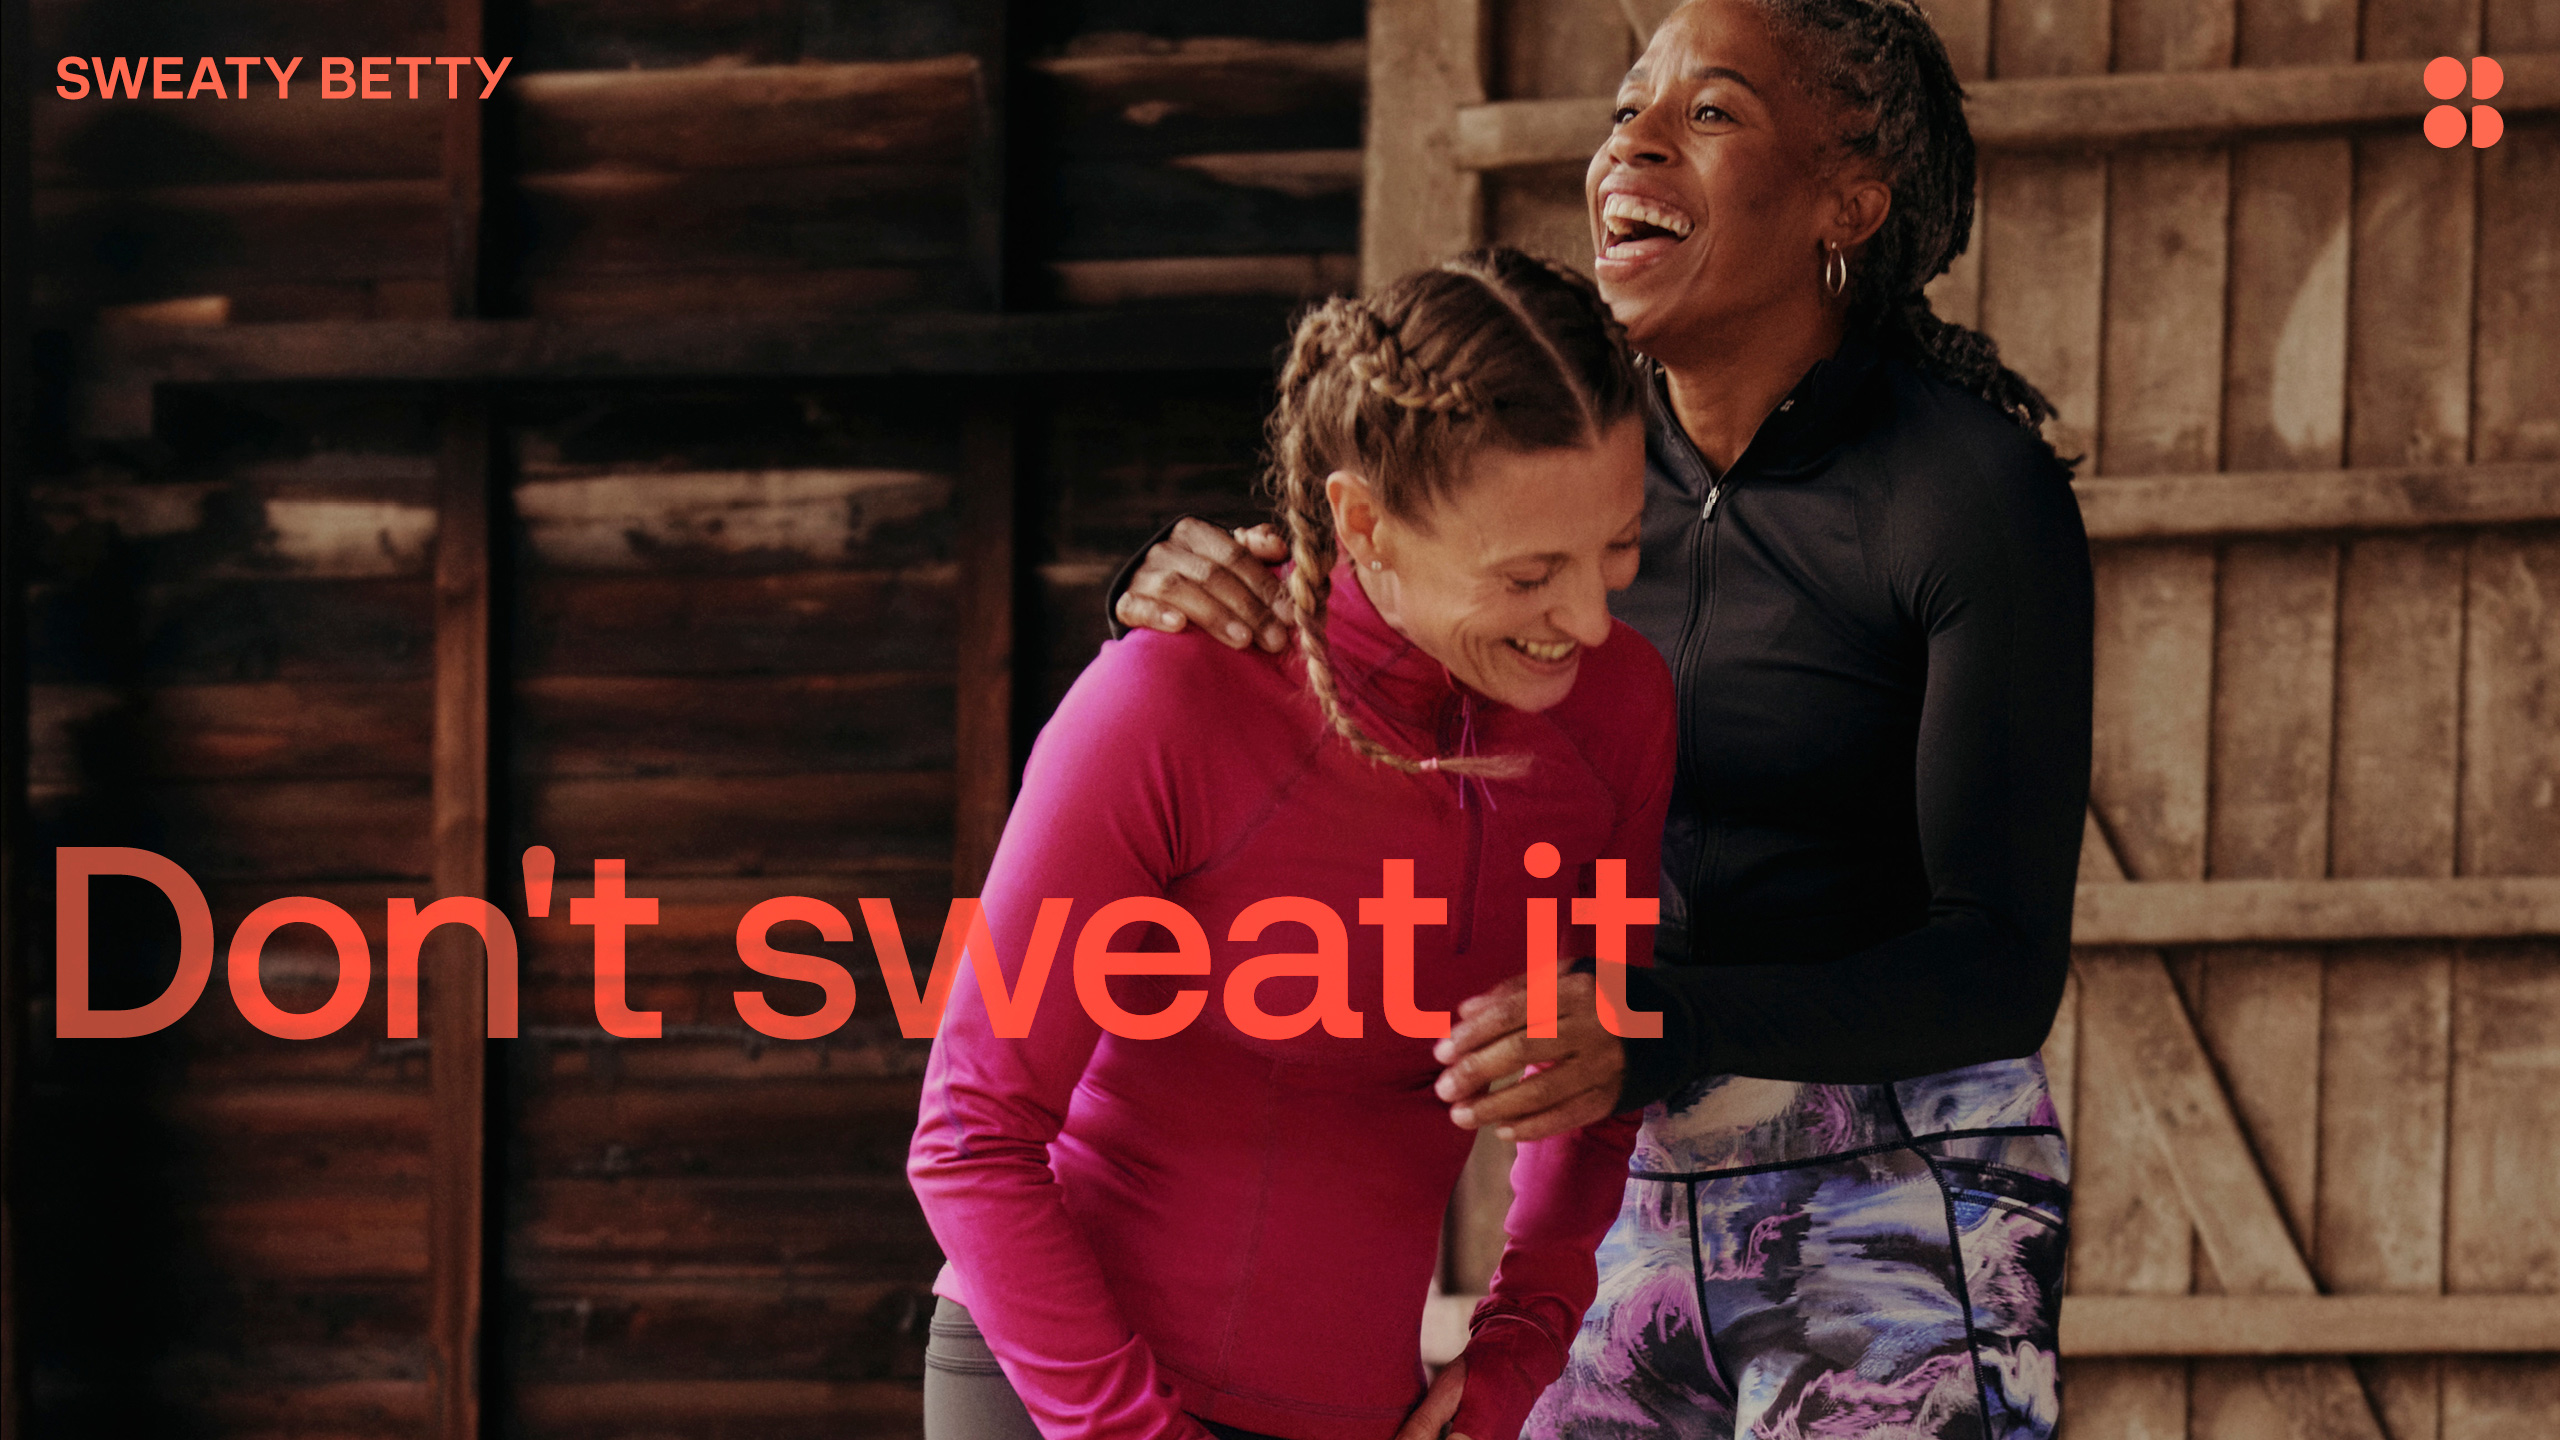 Sweaty Betty calls time on toxic exercise narratives with new brand outlook that re-examines empowerment